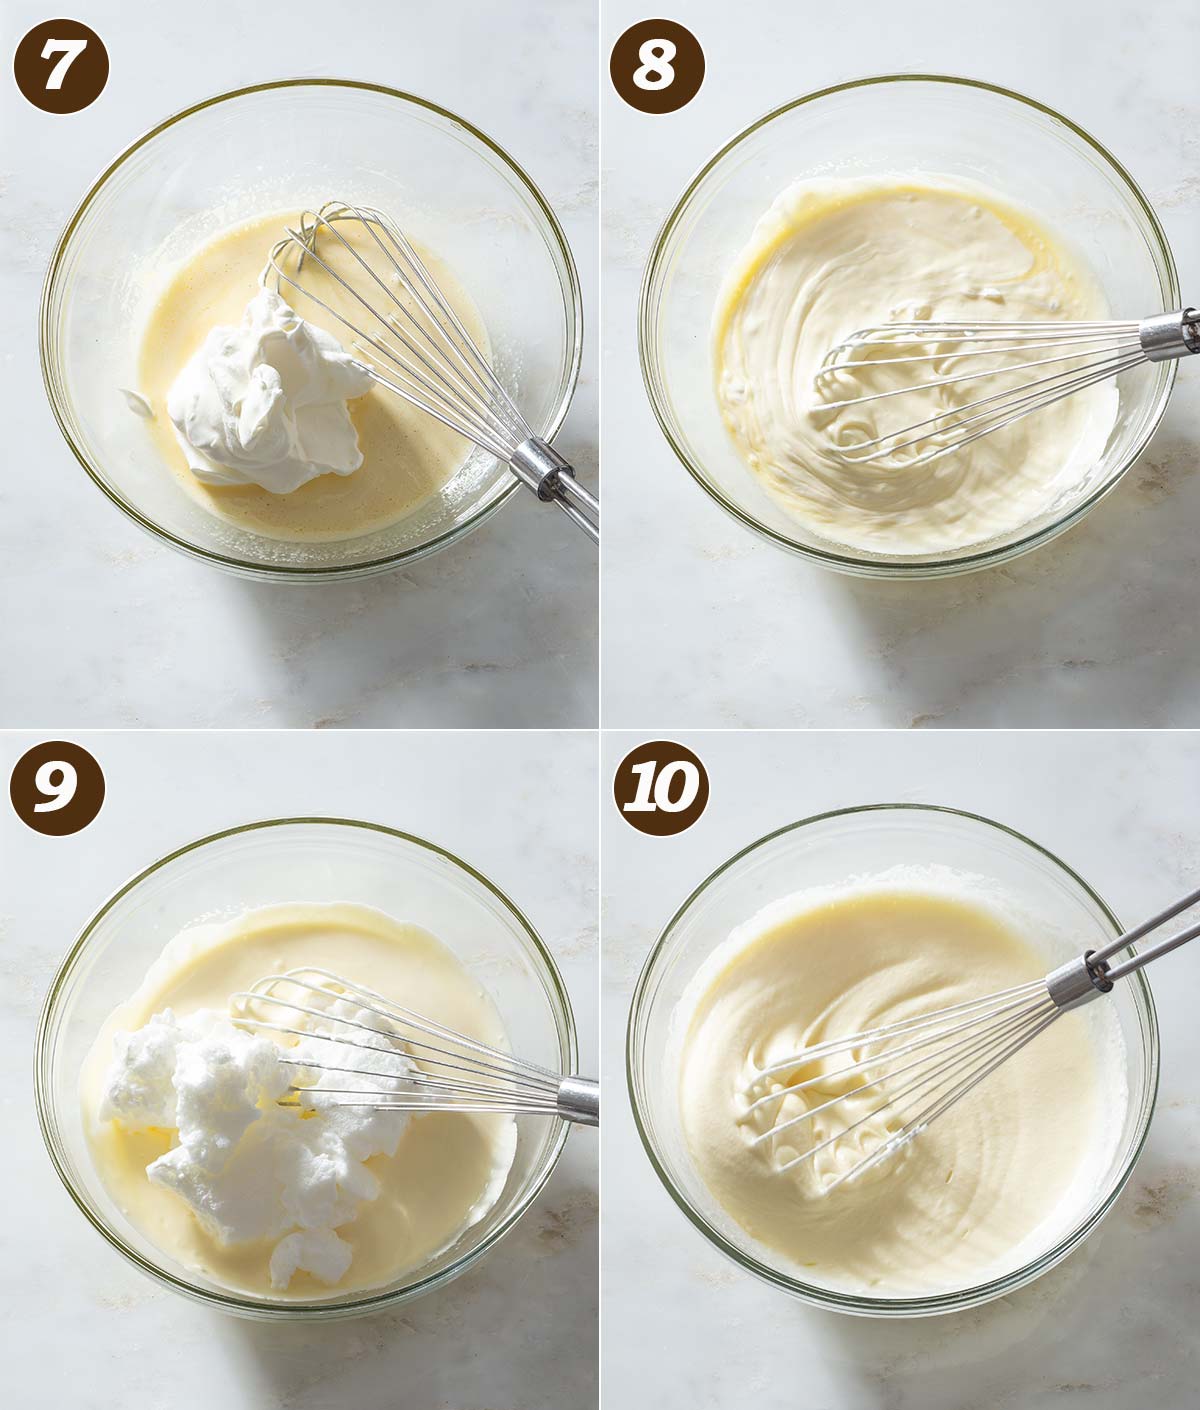 Whipped cream and whipped egg whites being whisked into custard.